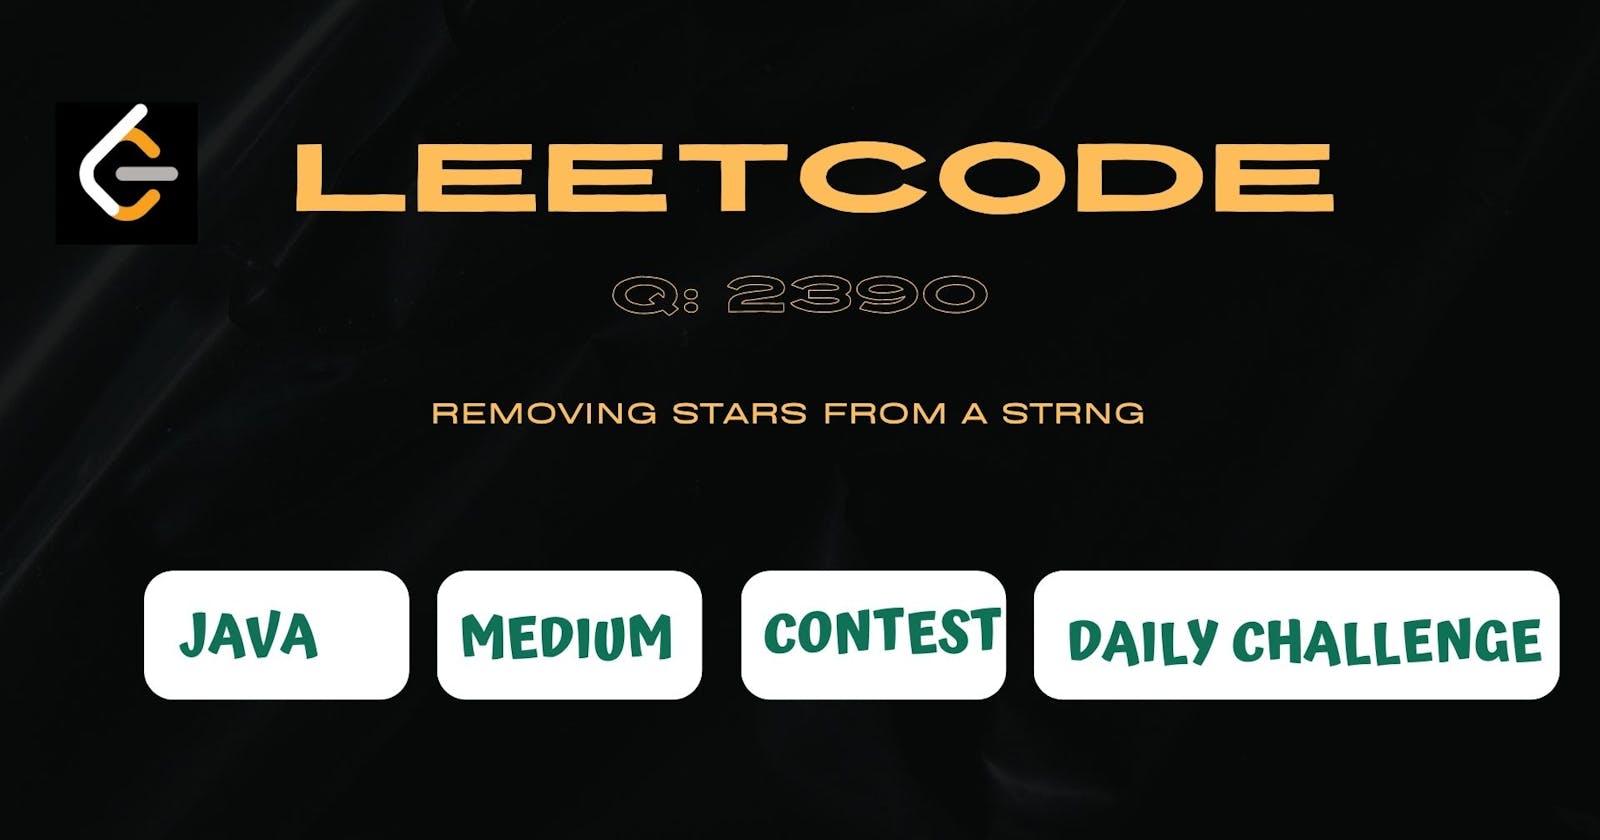 LeetCode : 2390 : REMOVING STARS FROM A STRING